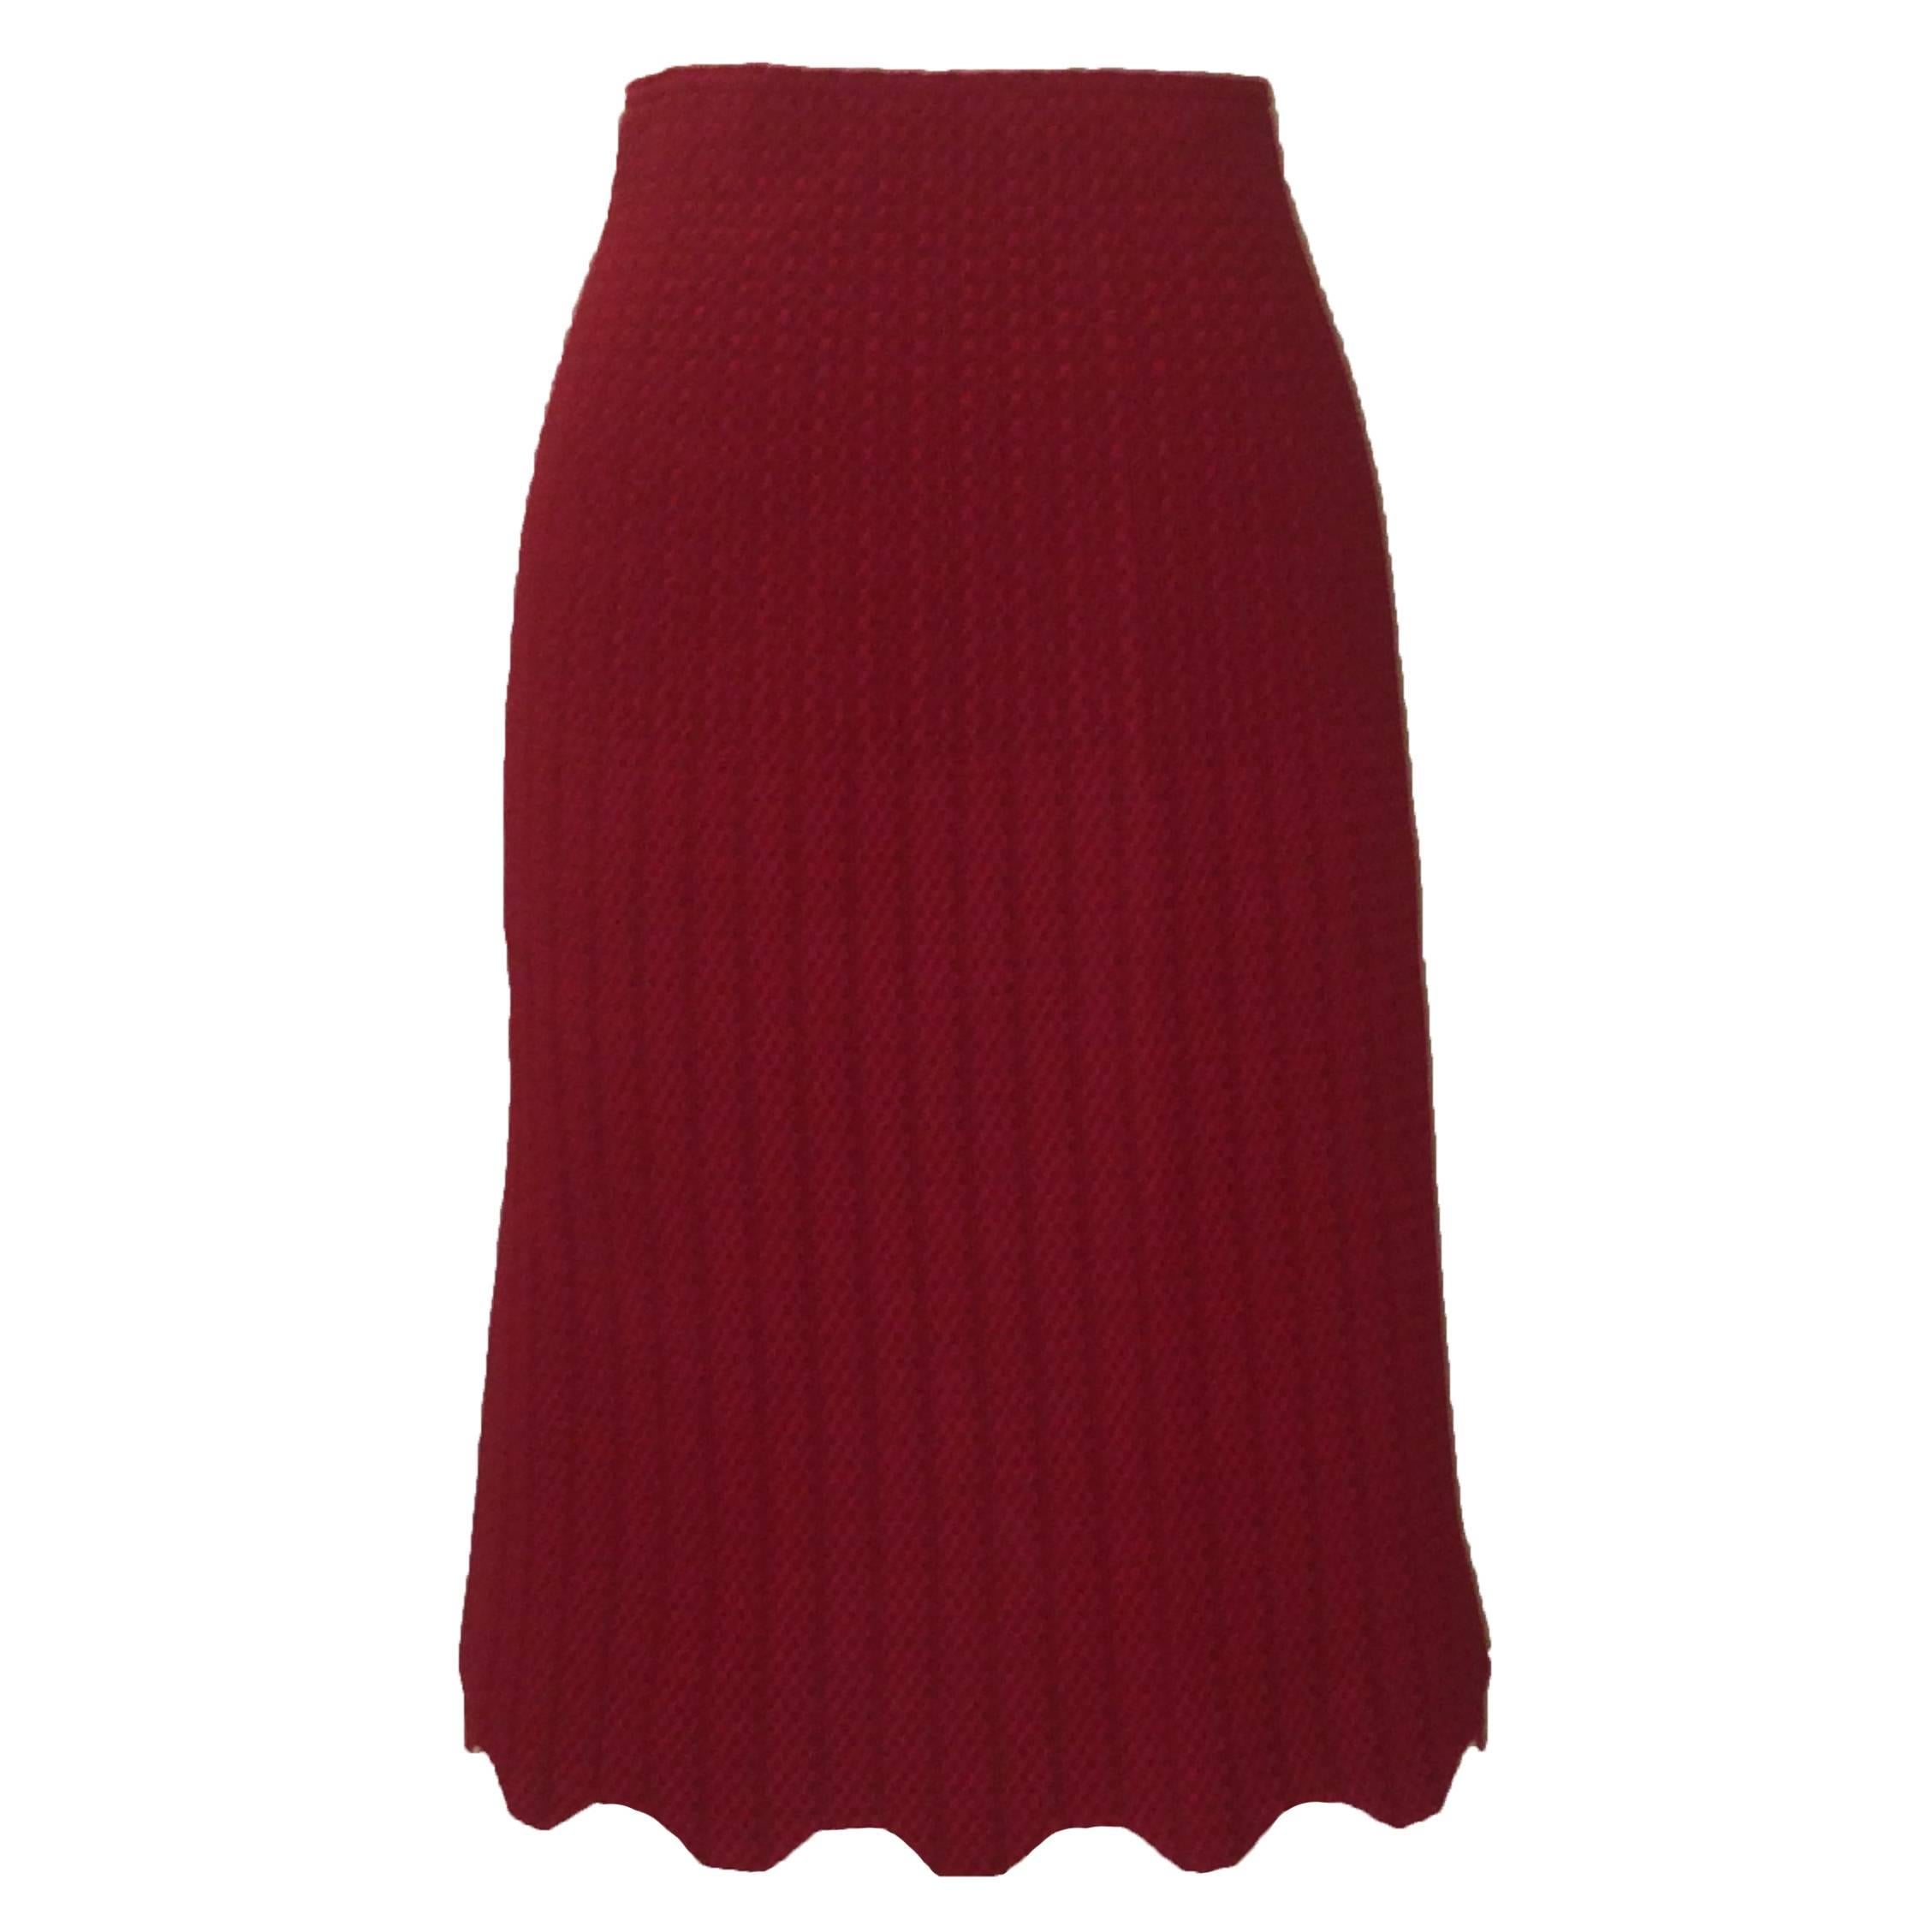 Alaia Recent Red Knit Straight Pencil Skirt New with Tags Scalloped Hem 